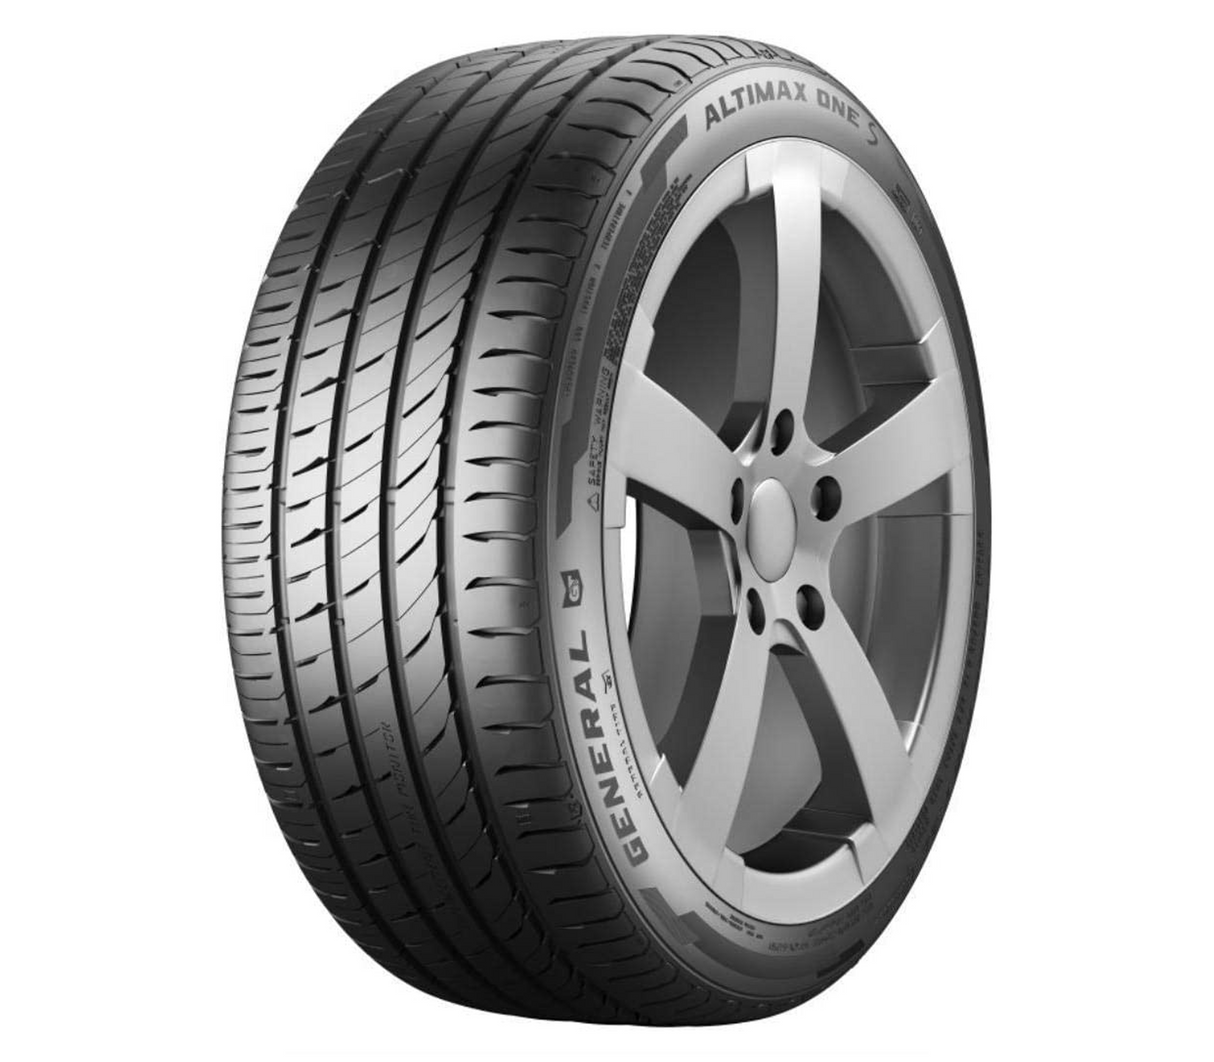 Neumático 205/65R16 95H Altimax One S General Tire